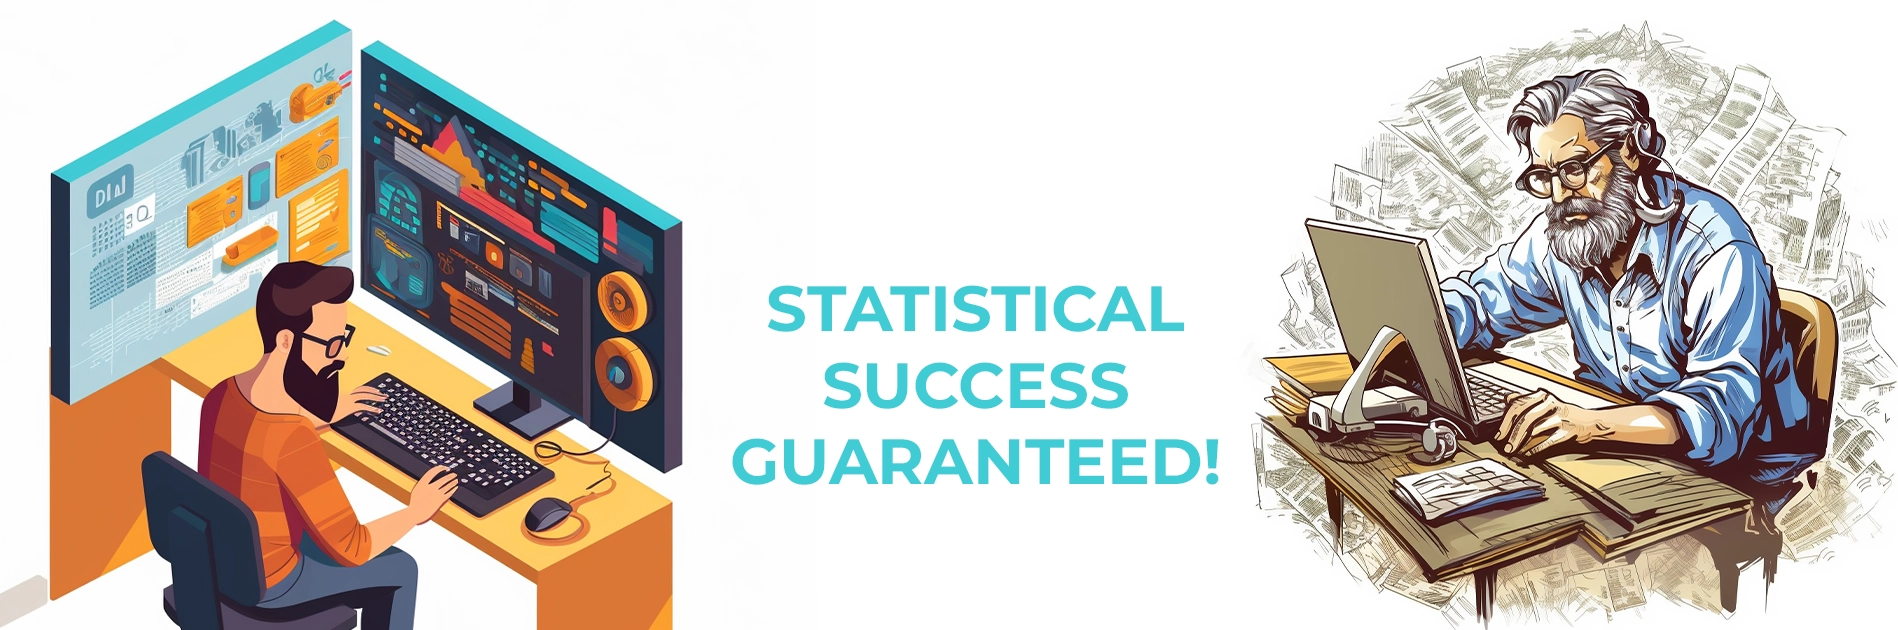 Excel In Class with Statistics Coursework Support From 3,000+ Competent Statisticians